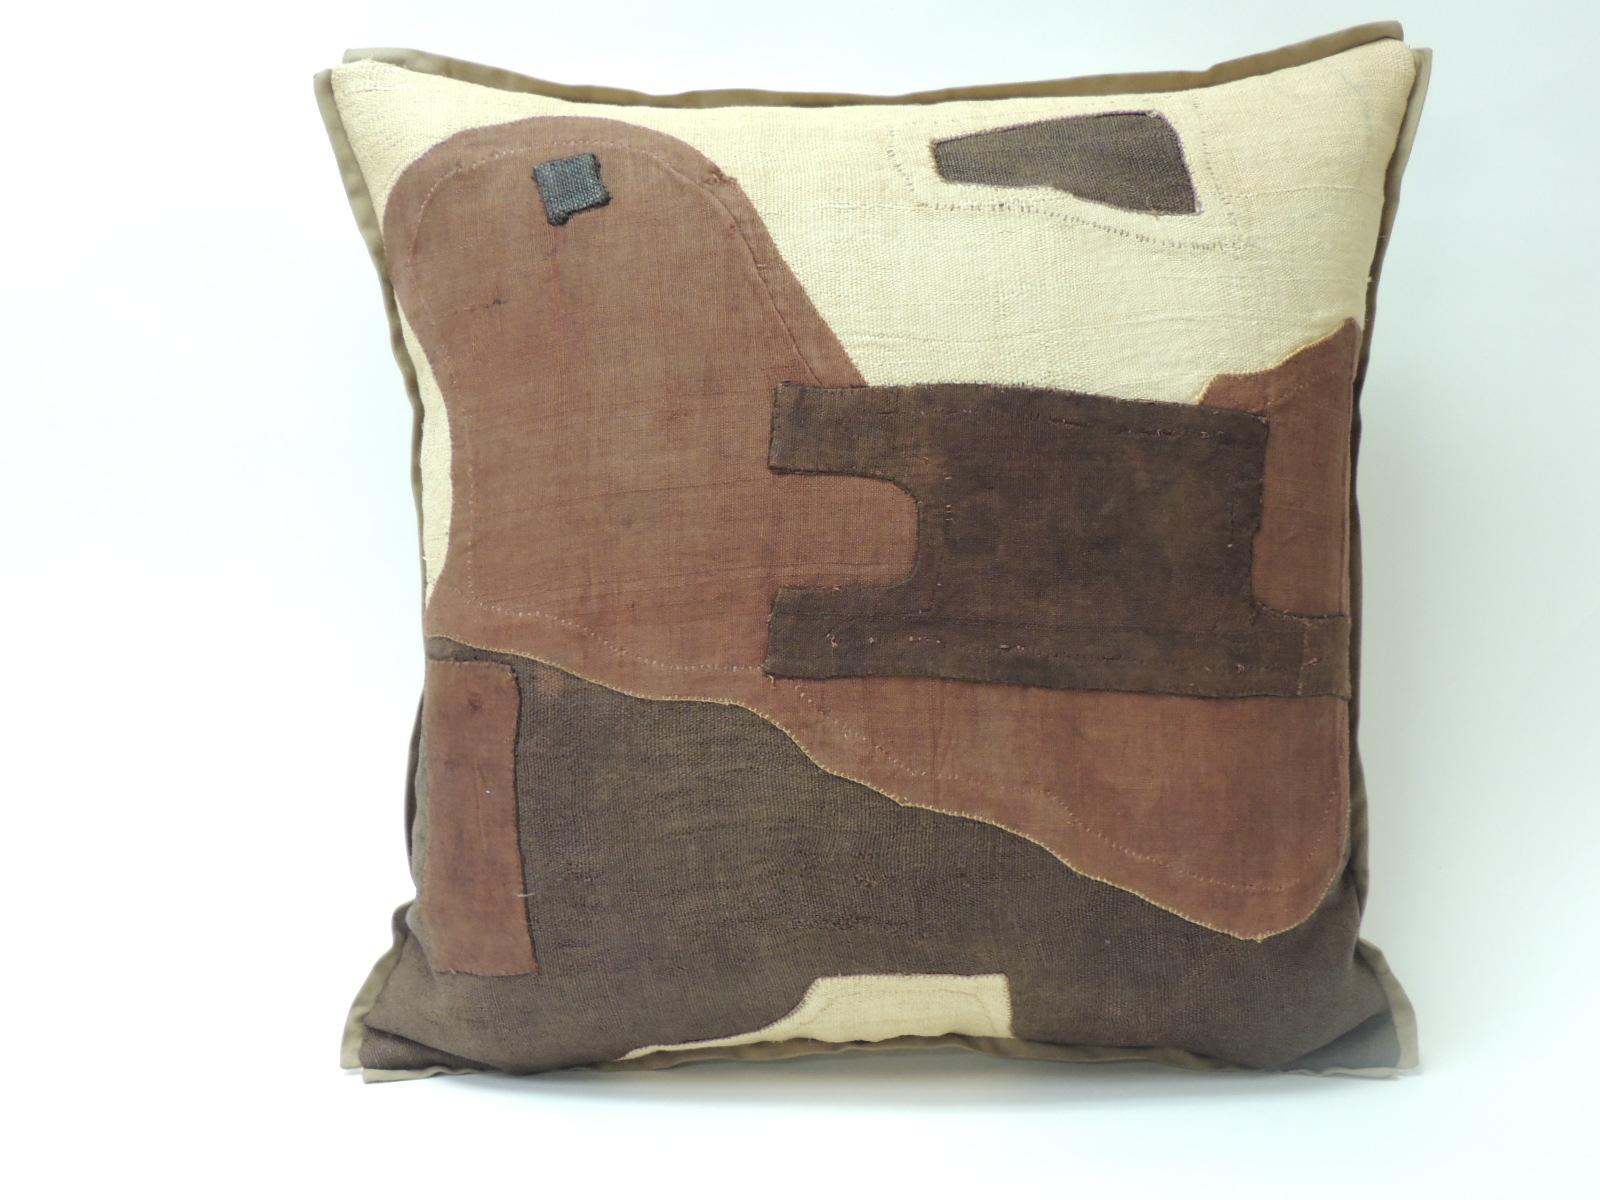 Applique raffia, patchwork and applique brown, black and natural decorative pillow.
Custom flat cotton trim in earth-tone khaki color all around. Natural Cotton and linen backing. Pillow hand-crafted and designed in the USA with custom made